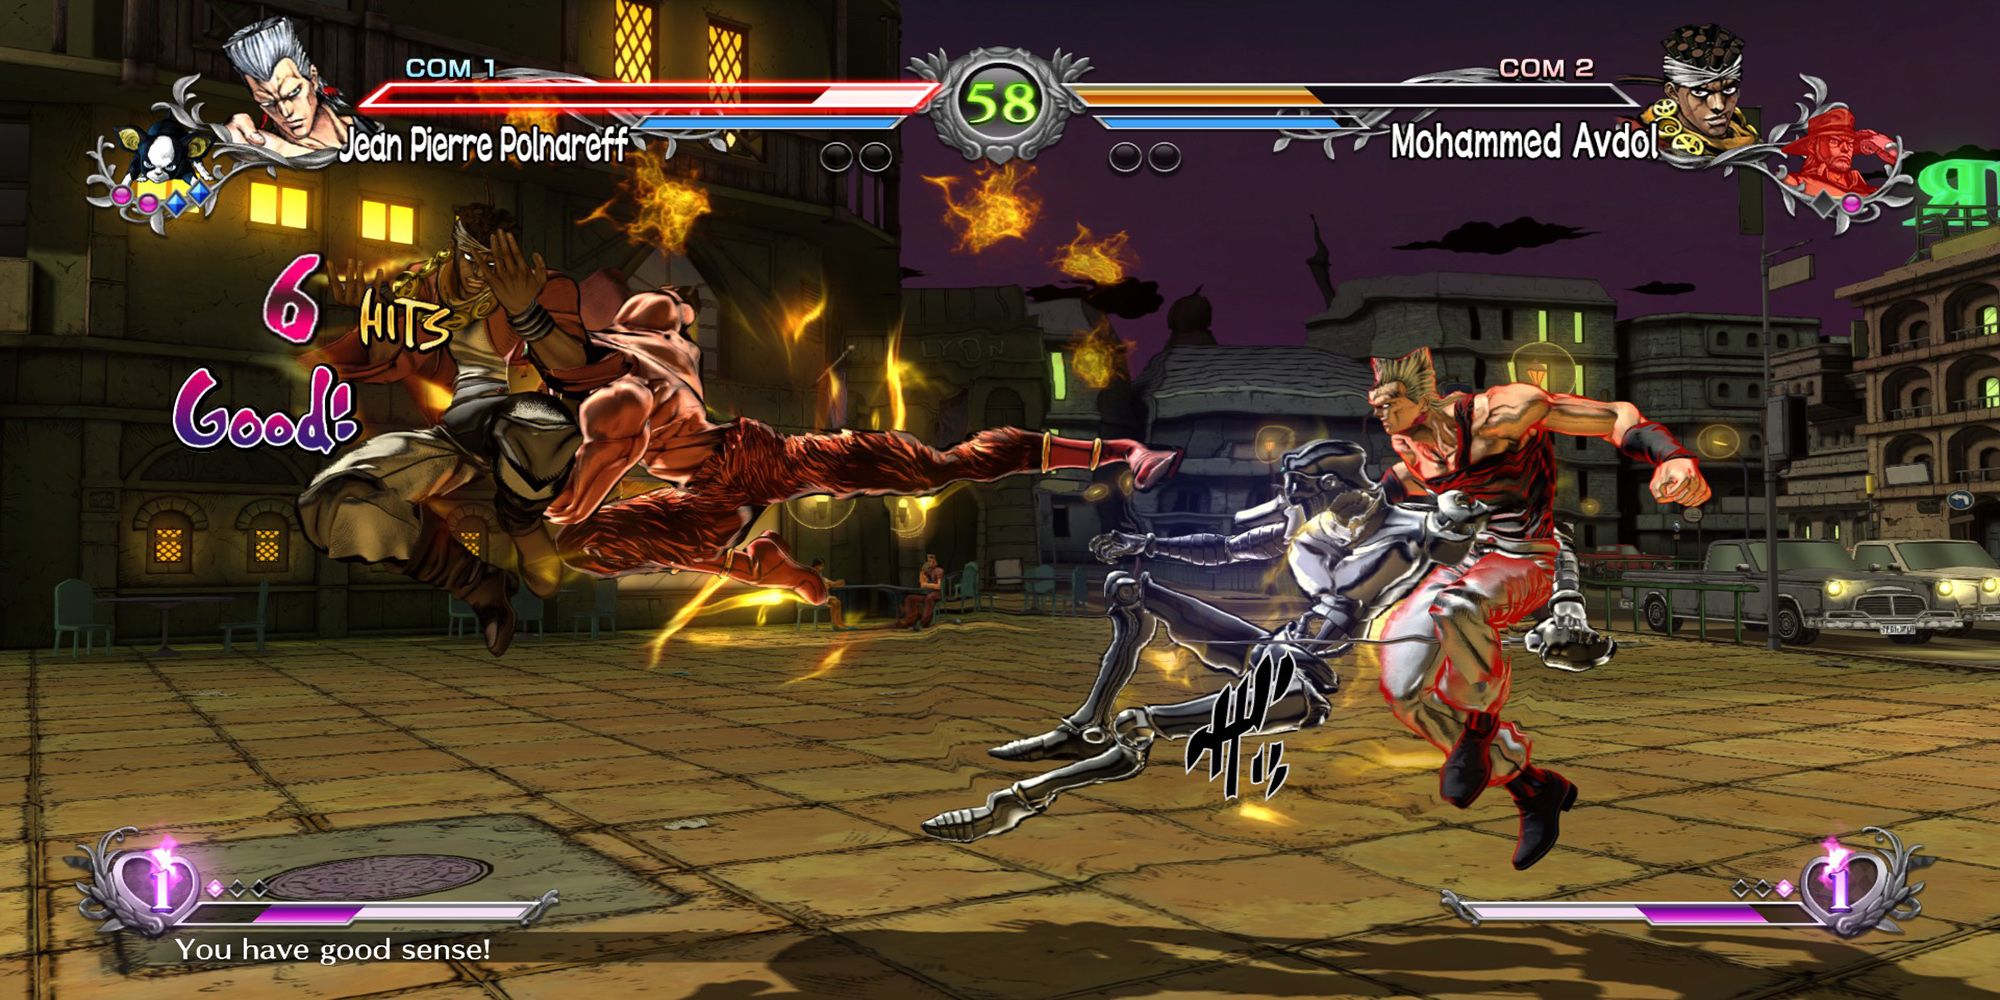 Silver Chariot dodges an attack from Magician's Red during a battle in El Cairo City in Jojo's Bizarre Adventure ASBR.